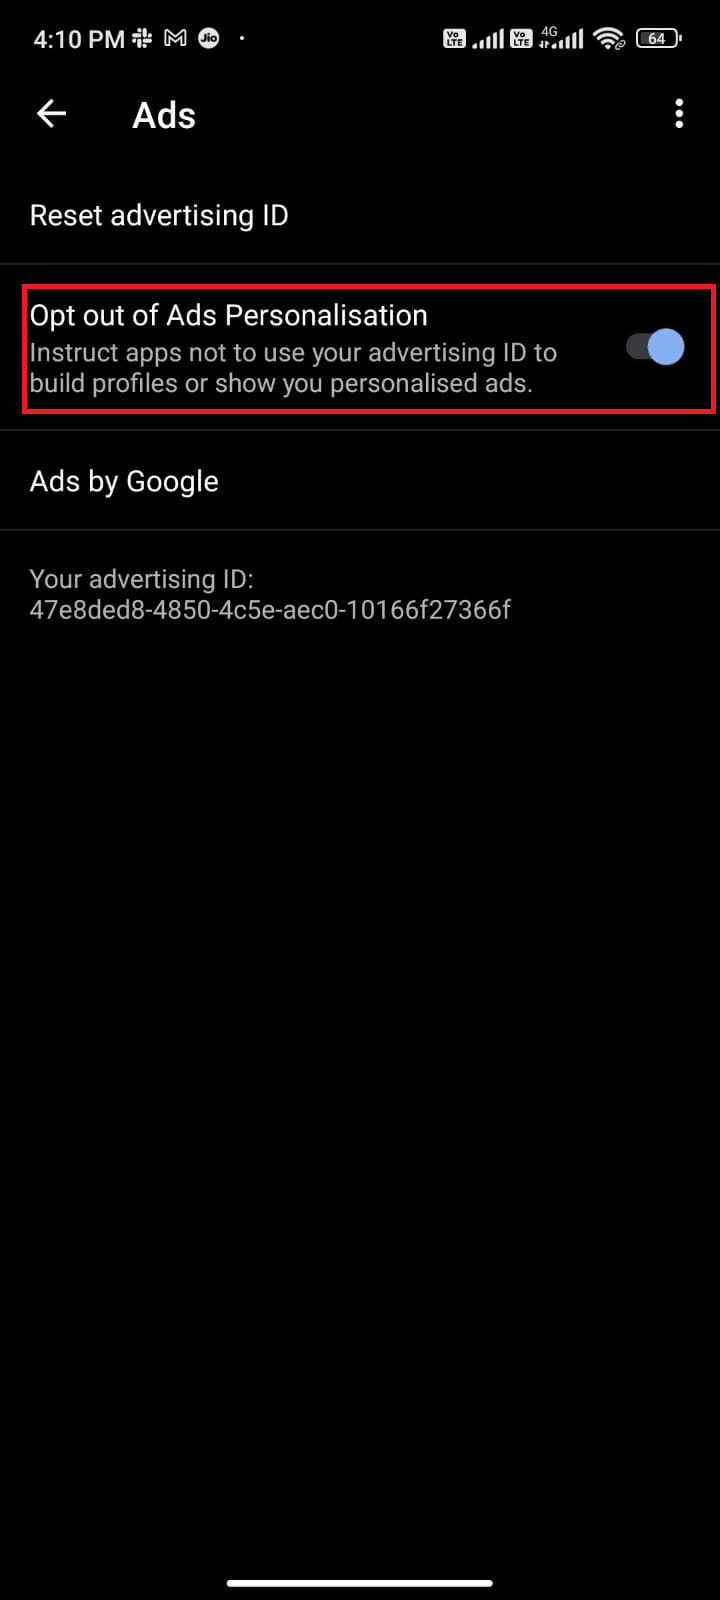 Tap the toggle option next to the Opt out of Ads Personalisation